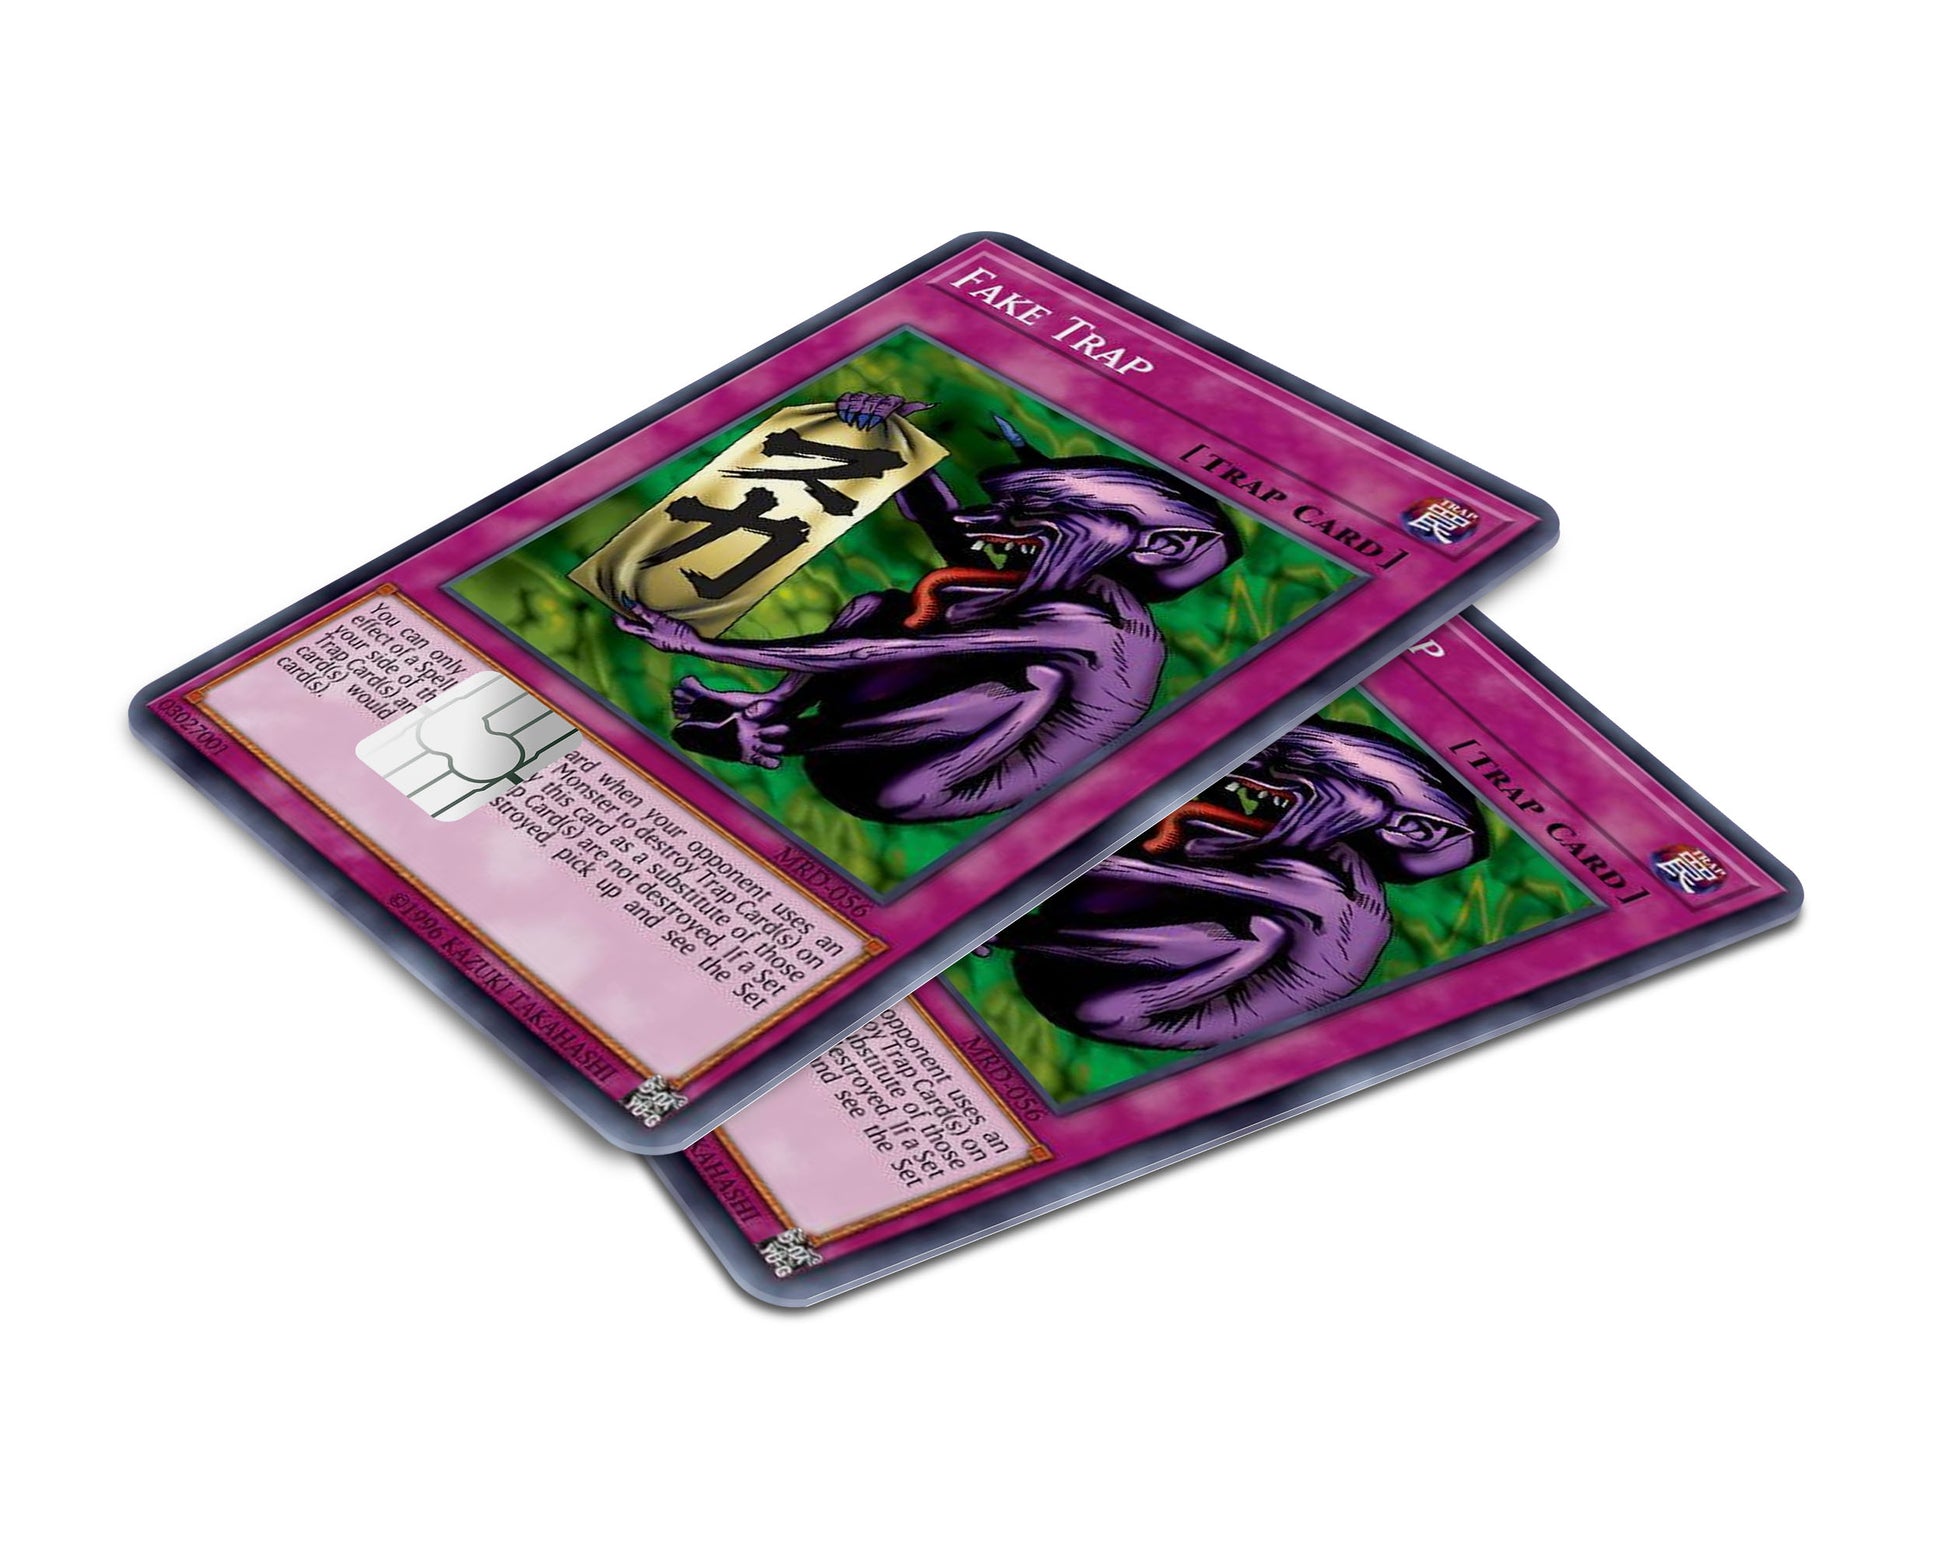 real yugioh trap cards